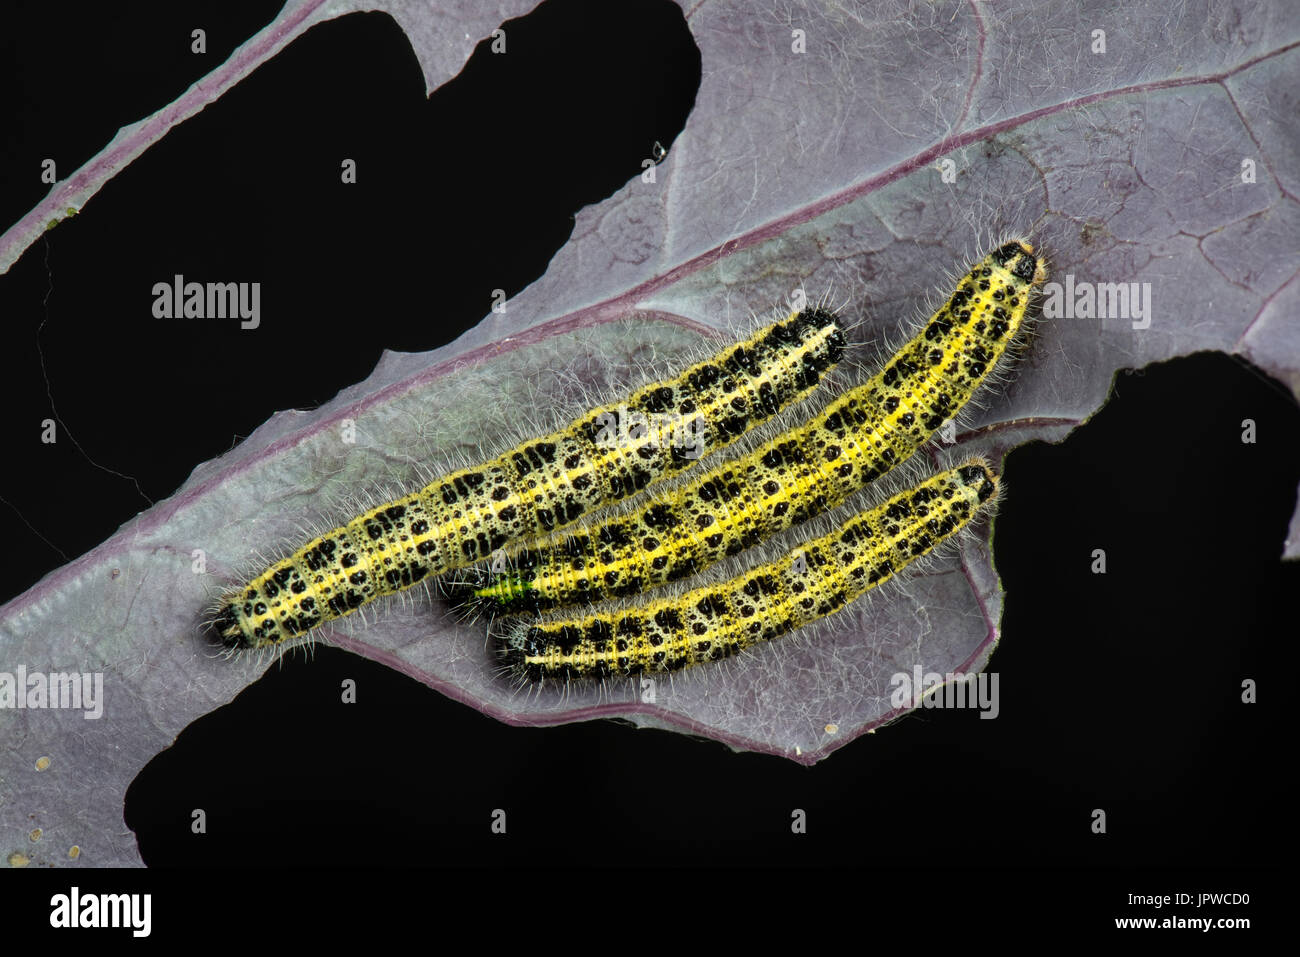 Cabbage white butterfly, Pieris brassicae, caterpillars, final instar, feeding on the leaves of a purple variety of brussel sprouts Stock Photo